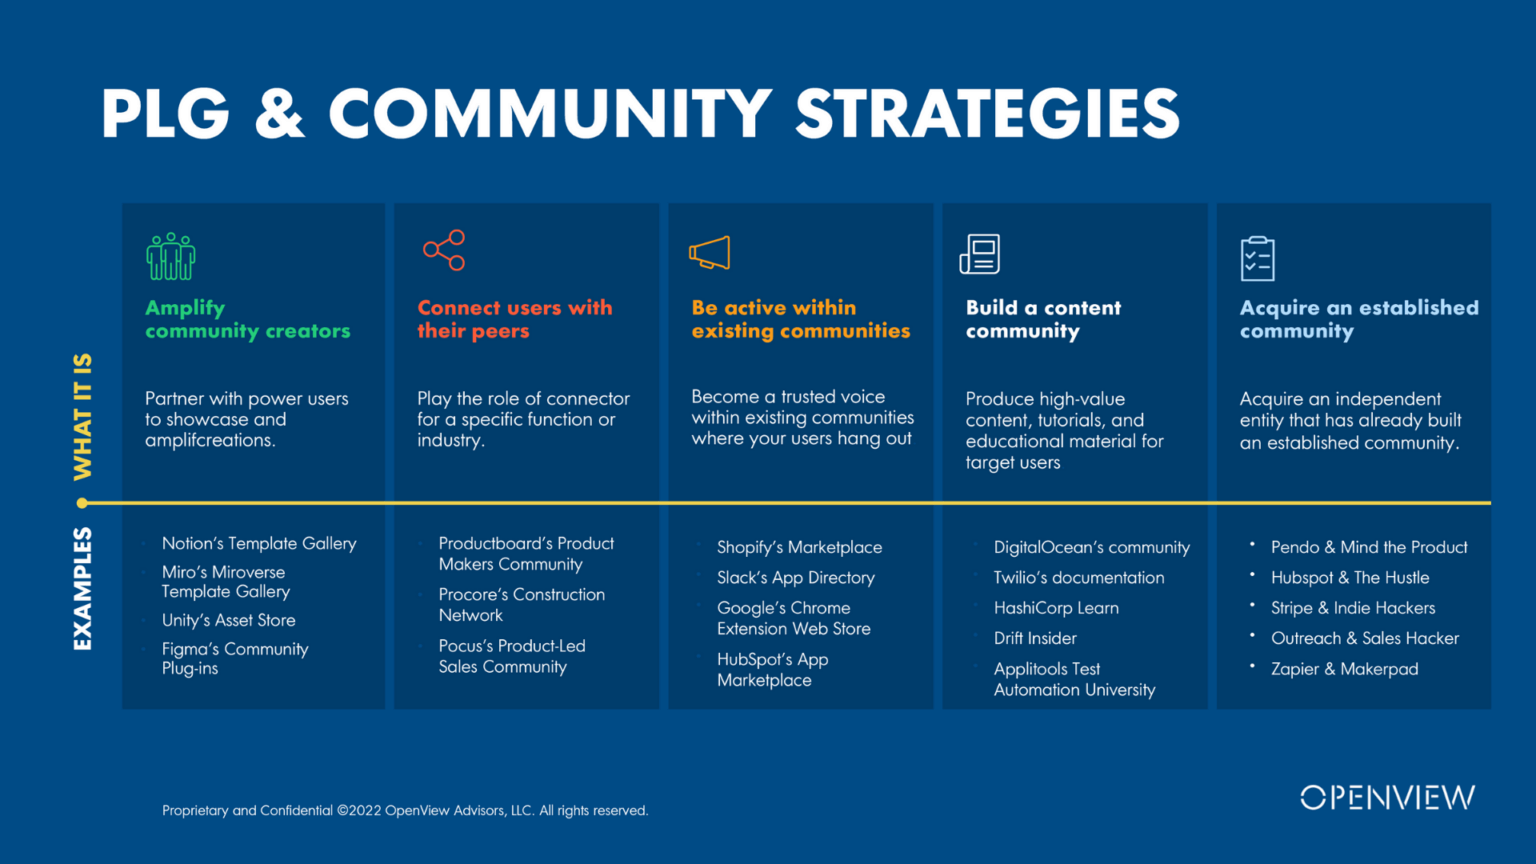 PLG, community strategies, and examples.